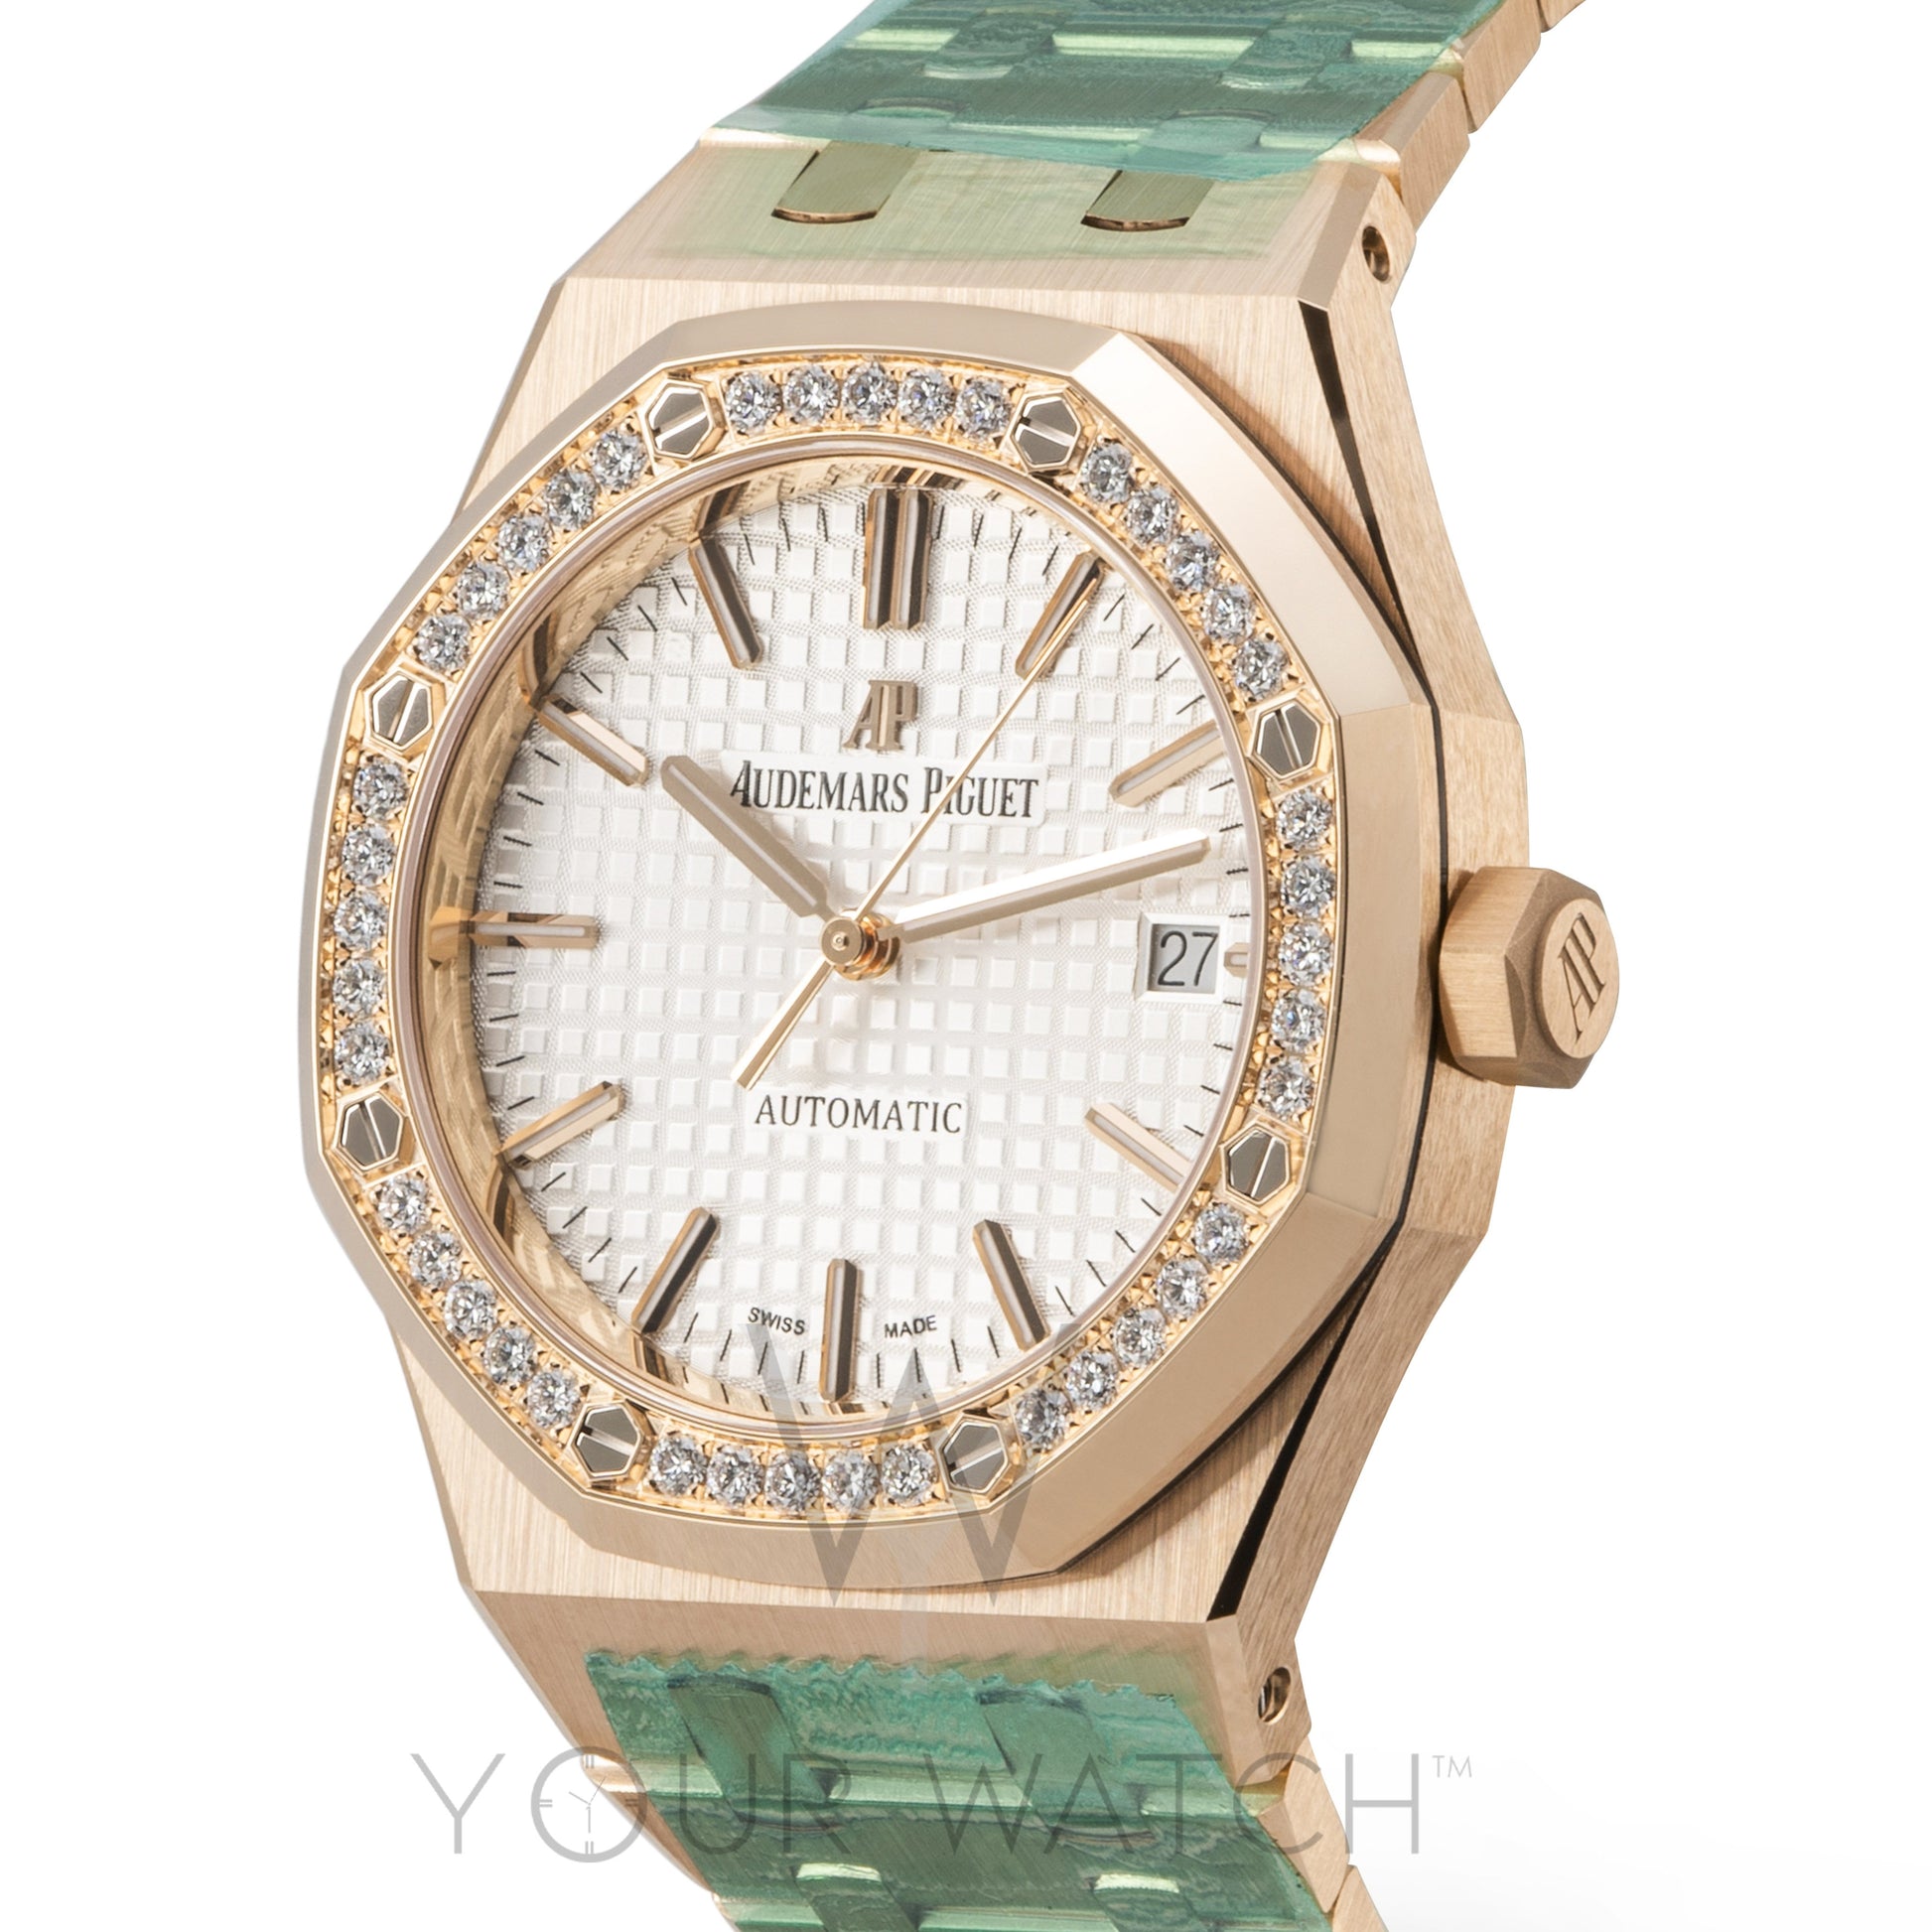 Royal Oak Chronograph 37mm Ladies Watch 15451OR.ZZ.1256OR.01